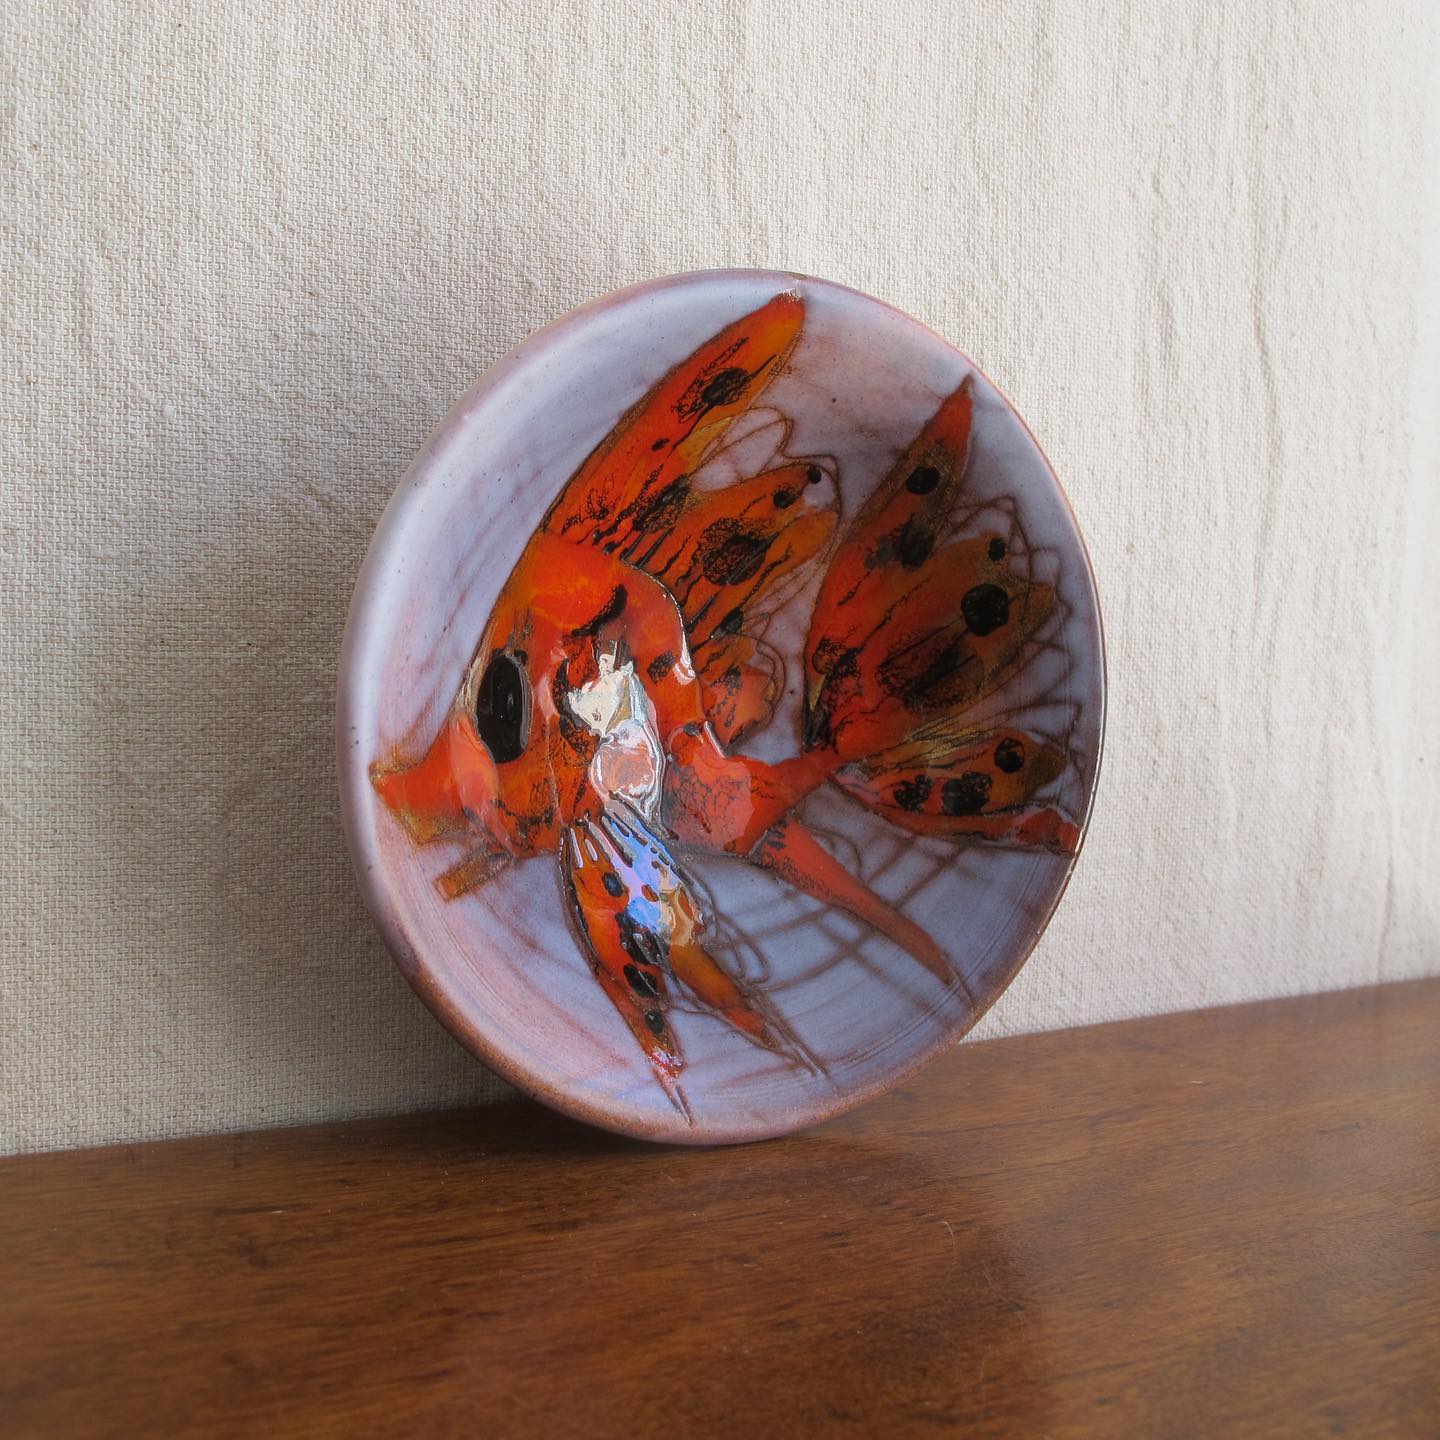 Vallauris French art pottery dish or bowl with goldfish or koi carp in brightly colored orange majolica glazes c. 1950 1960